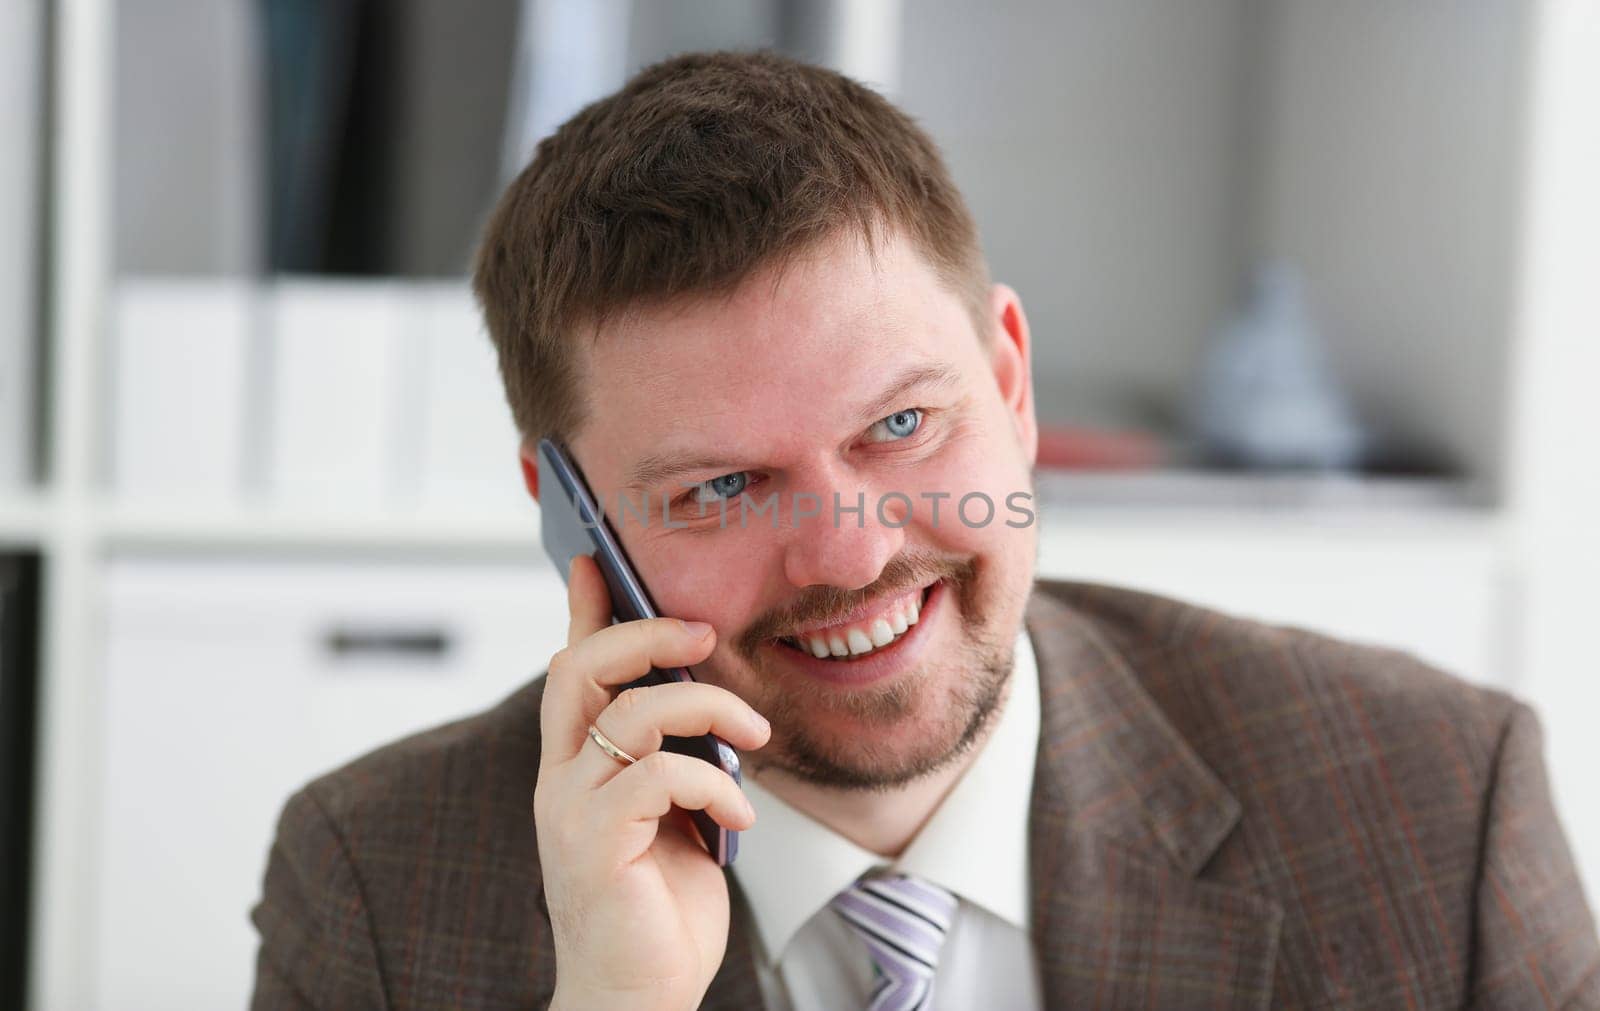 Handsome smiling businessman talk cellphone in office portrait. Stay in touch solution negotiate meeting job white collar busy life style electronic device store professional training concept